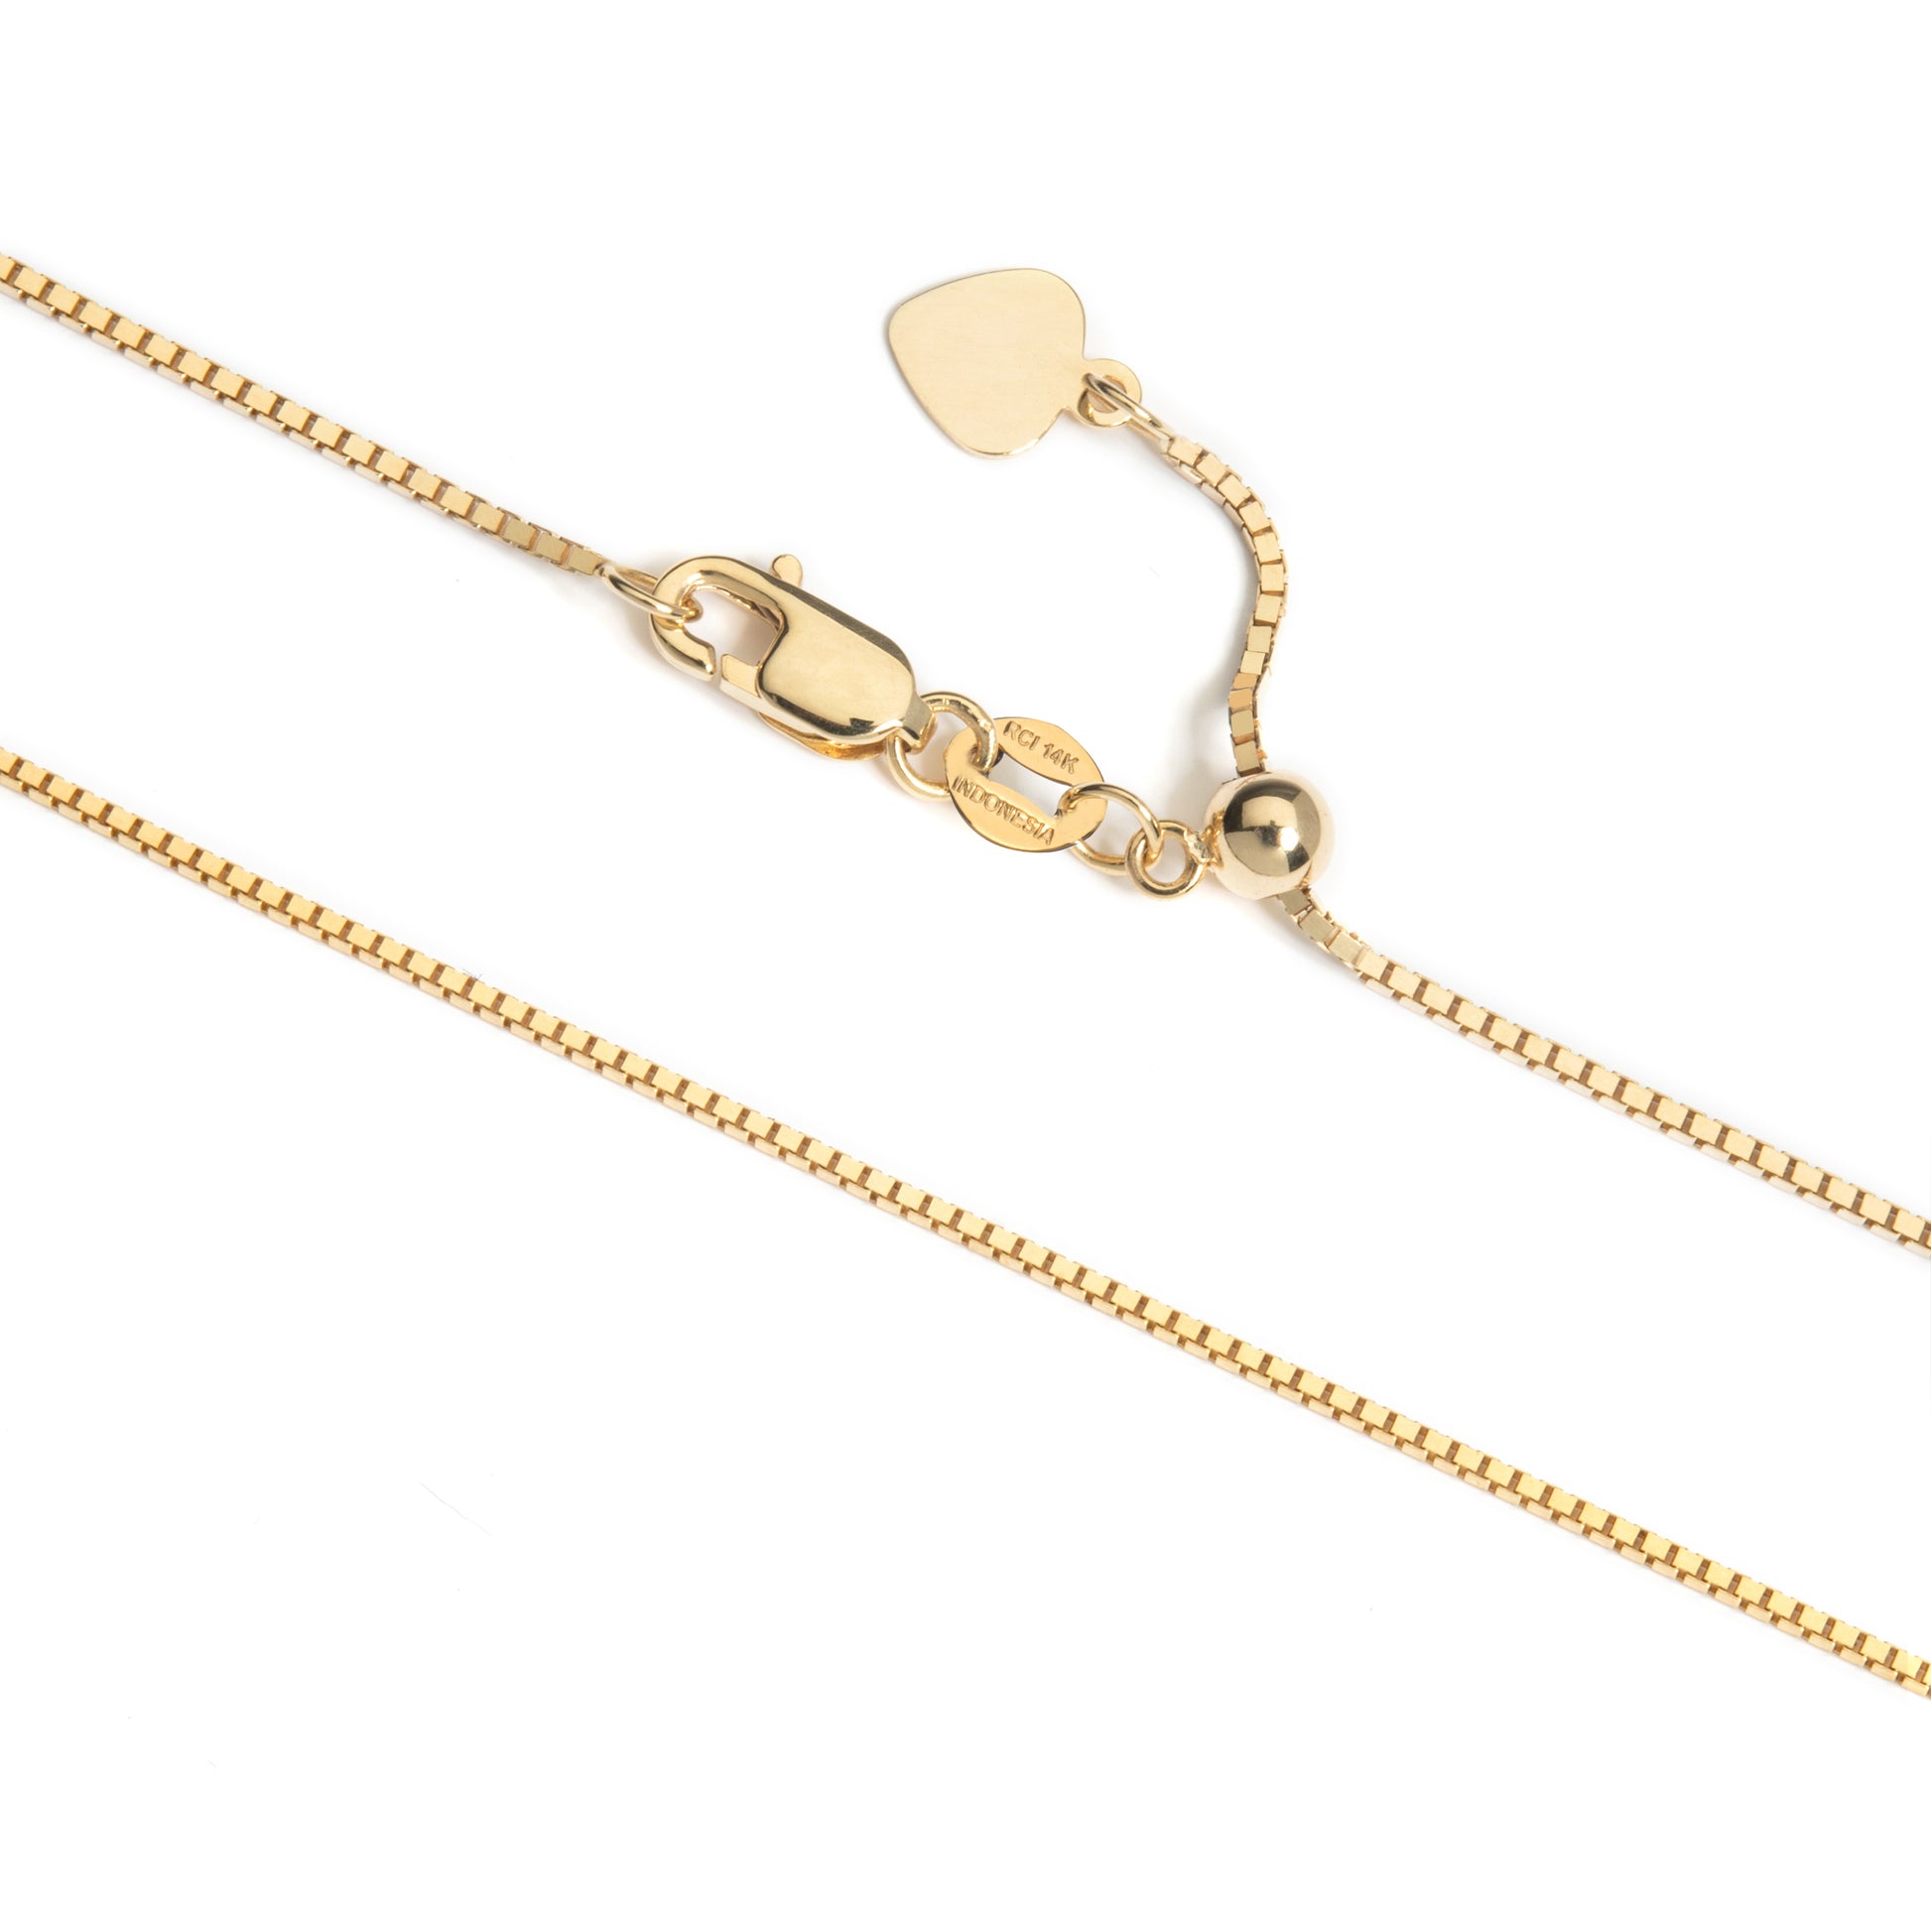 Adjustable Box Link Chain Necklace | 14K Gold or Sterling Silver | Up to 24" Length - Adora Fine Jewelry